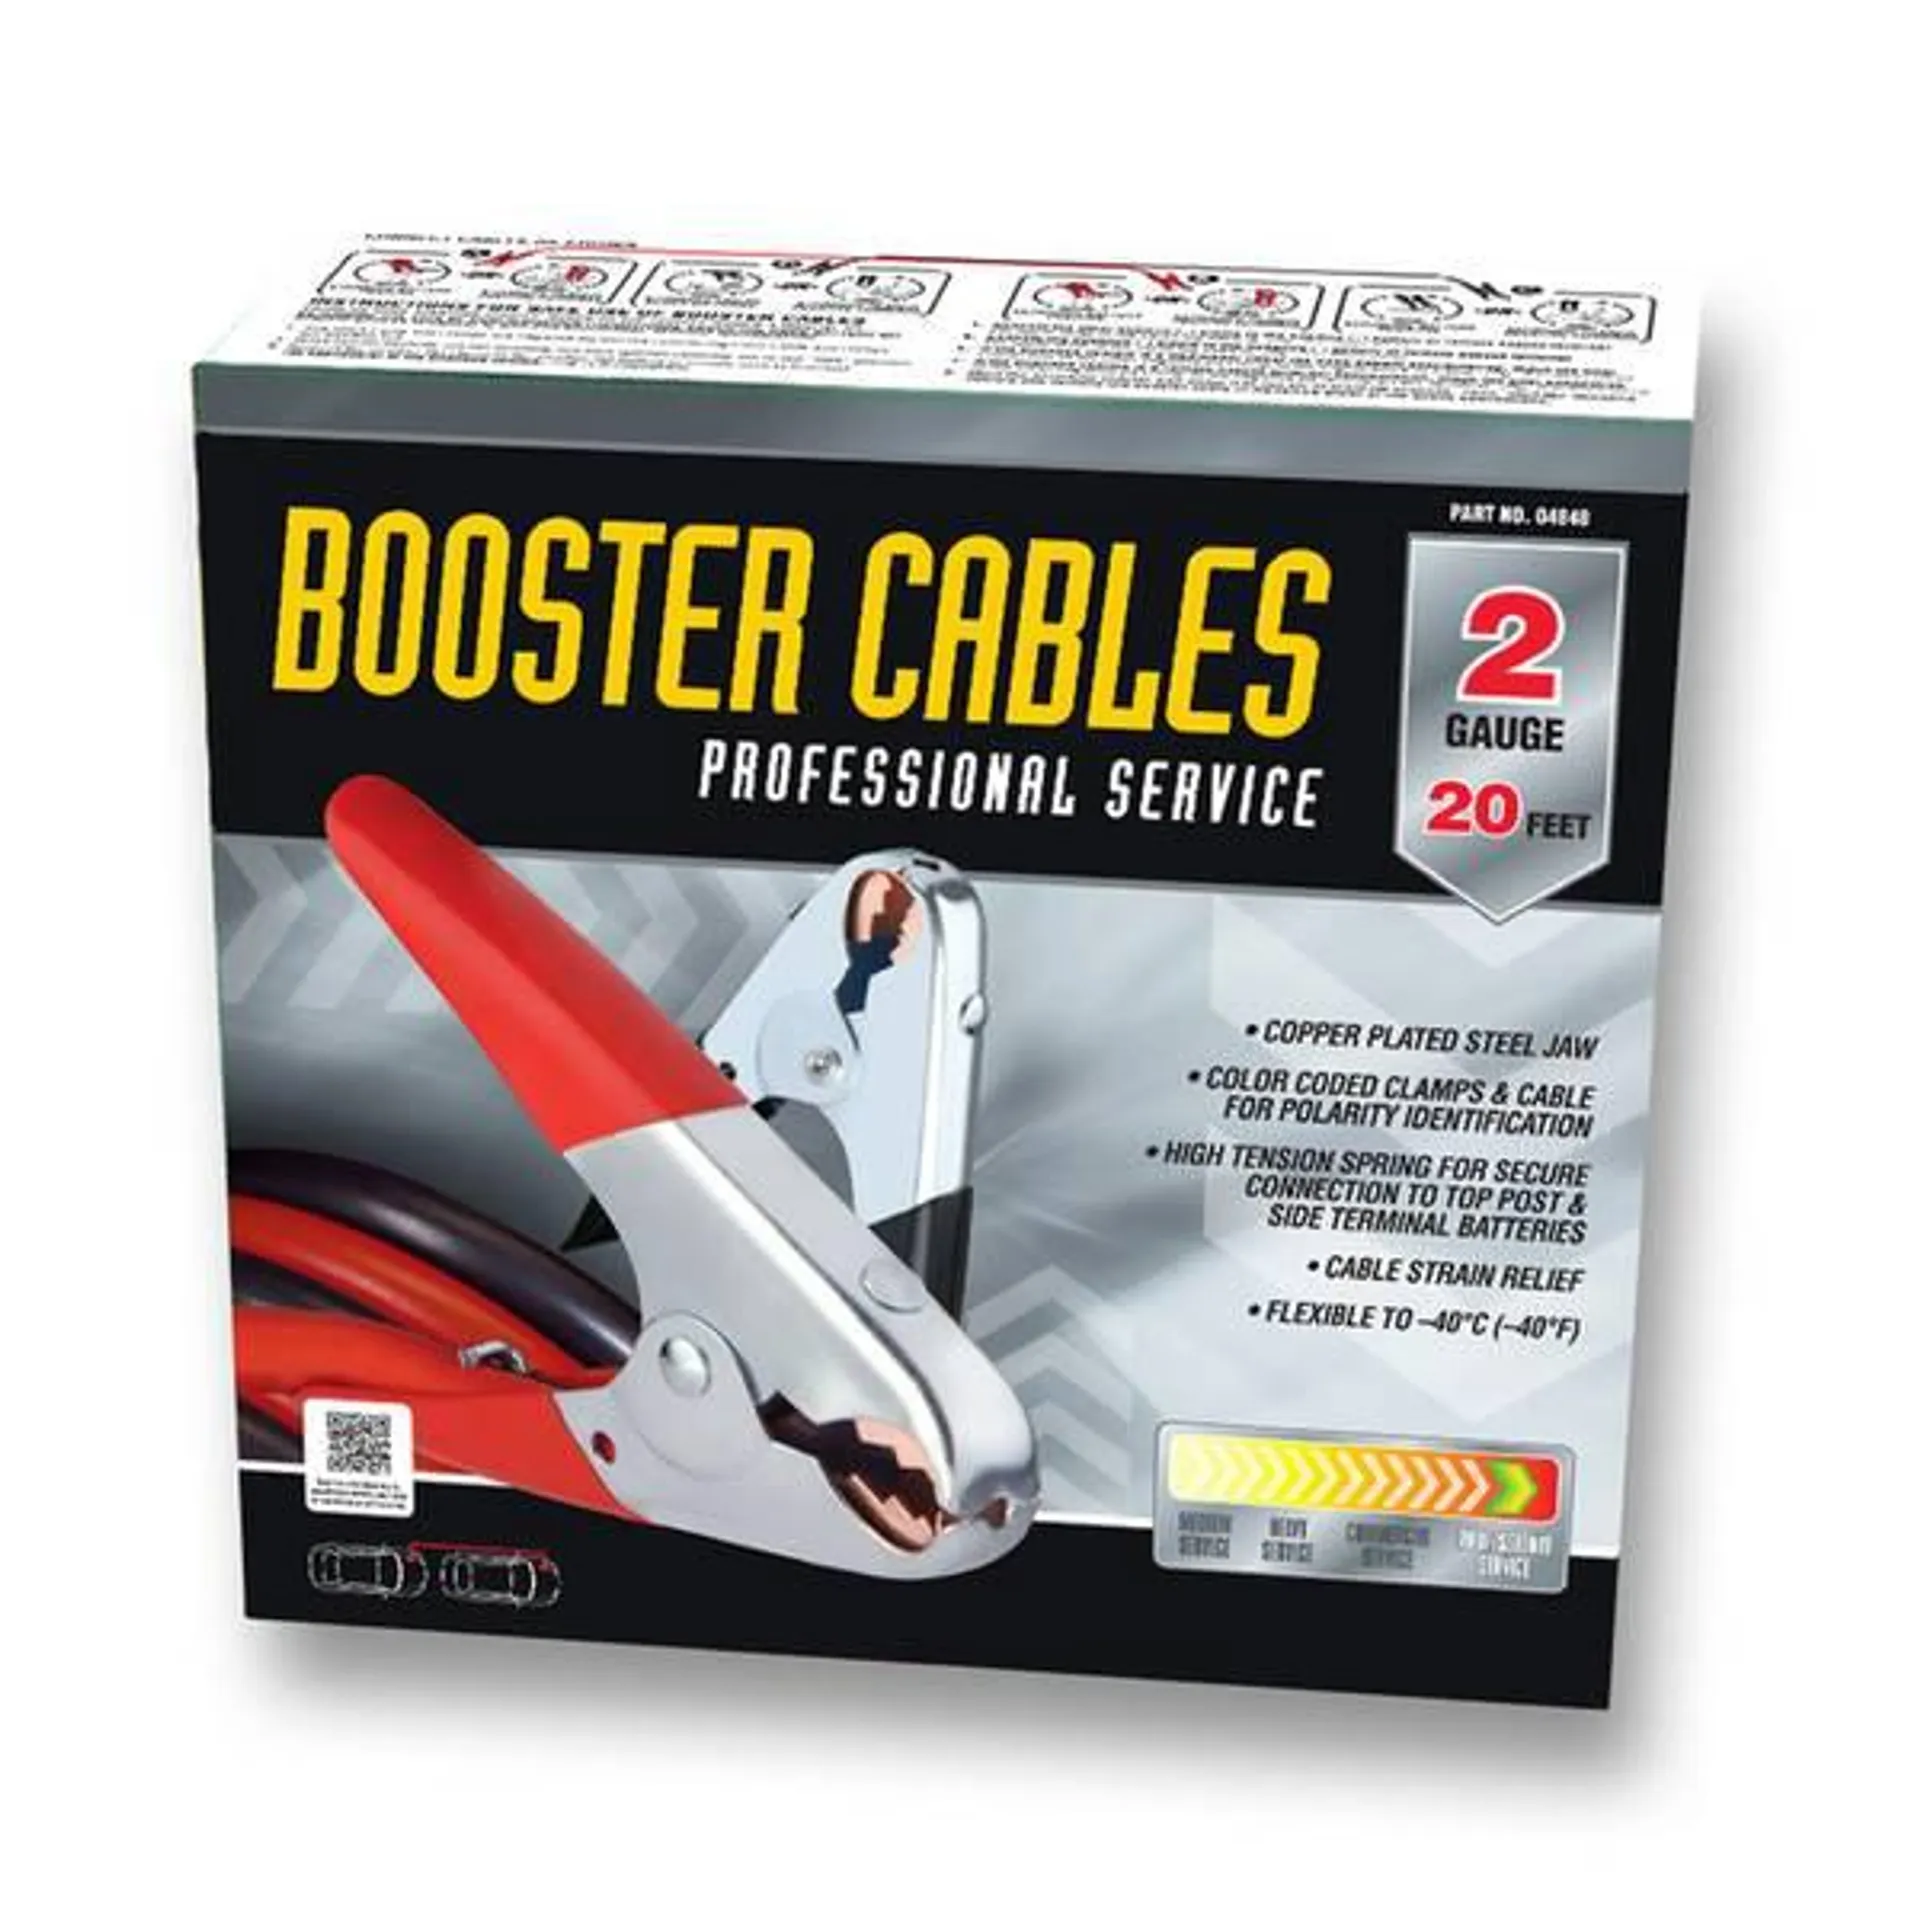 2 Gauge Booster Cables